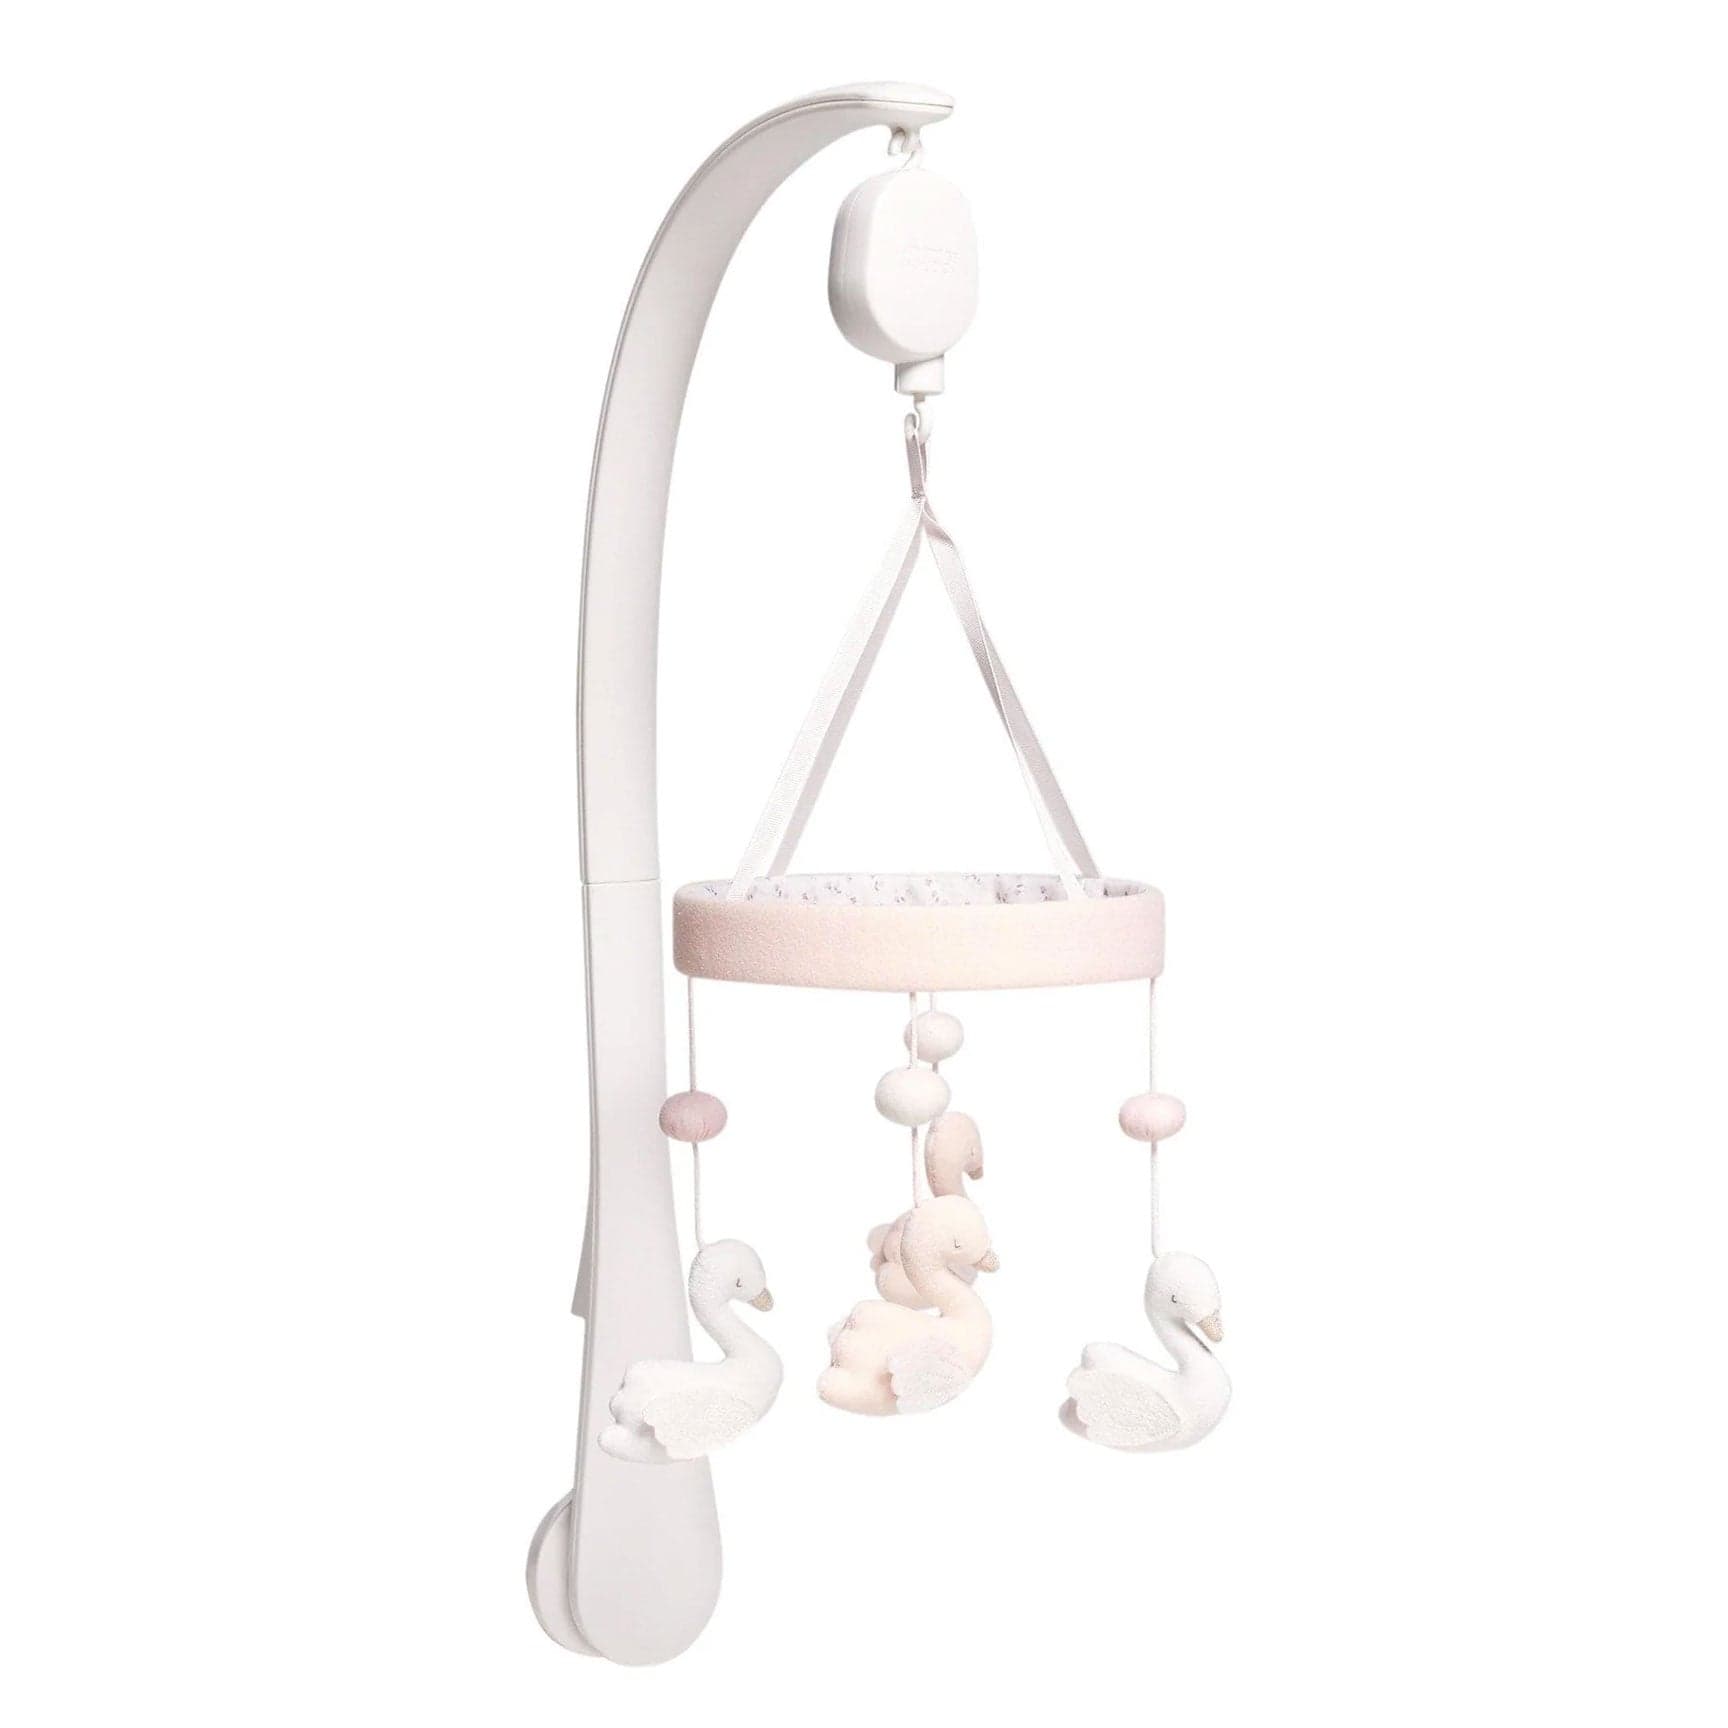 Mamas & Papas musical mobiles Mamas & Papas Welcome to the World Cot Musical Mobile - Floral 7560WW301